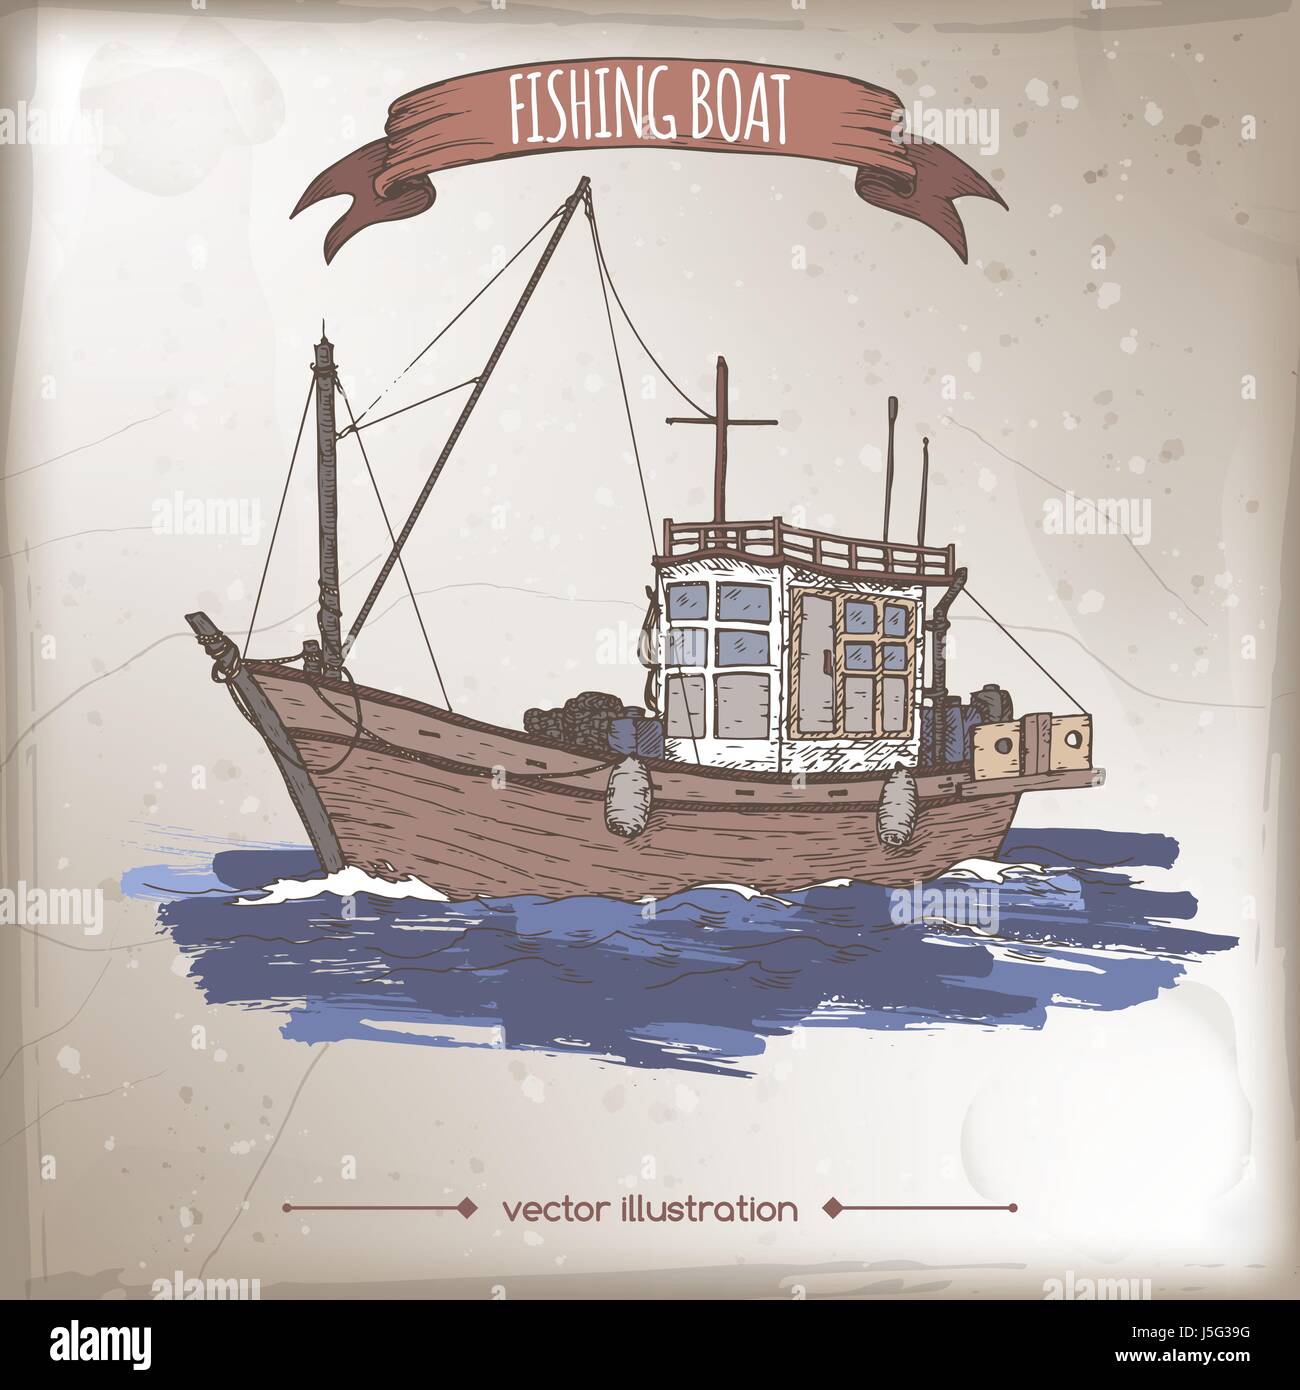 fishing boat drawing color